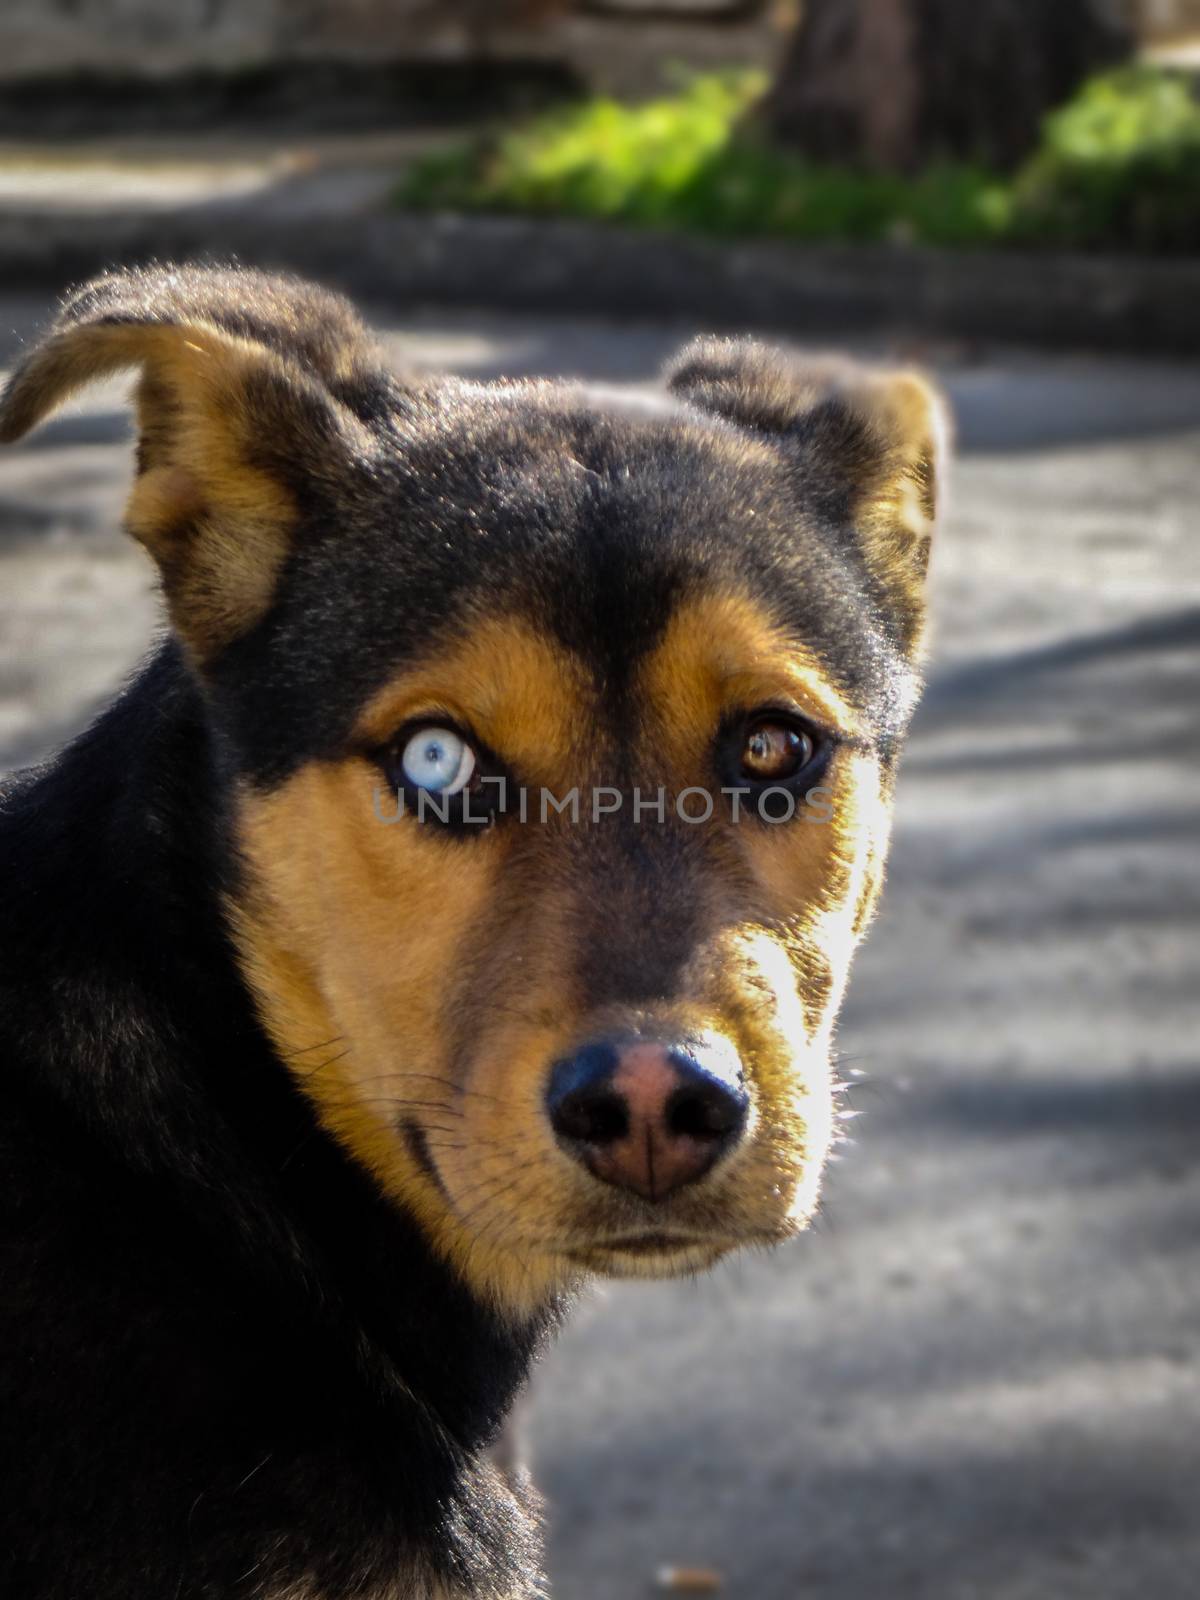 A dog with the gift of heterochromia, which is having two different iris colors.